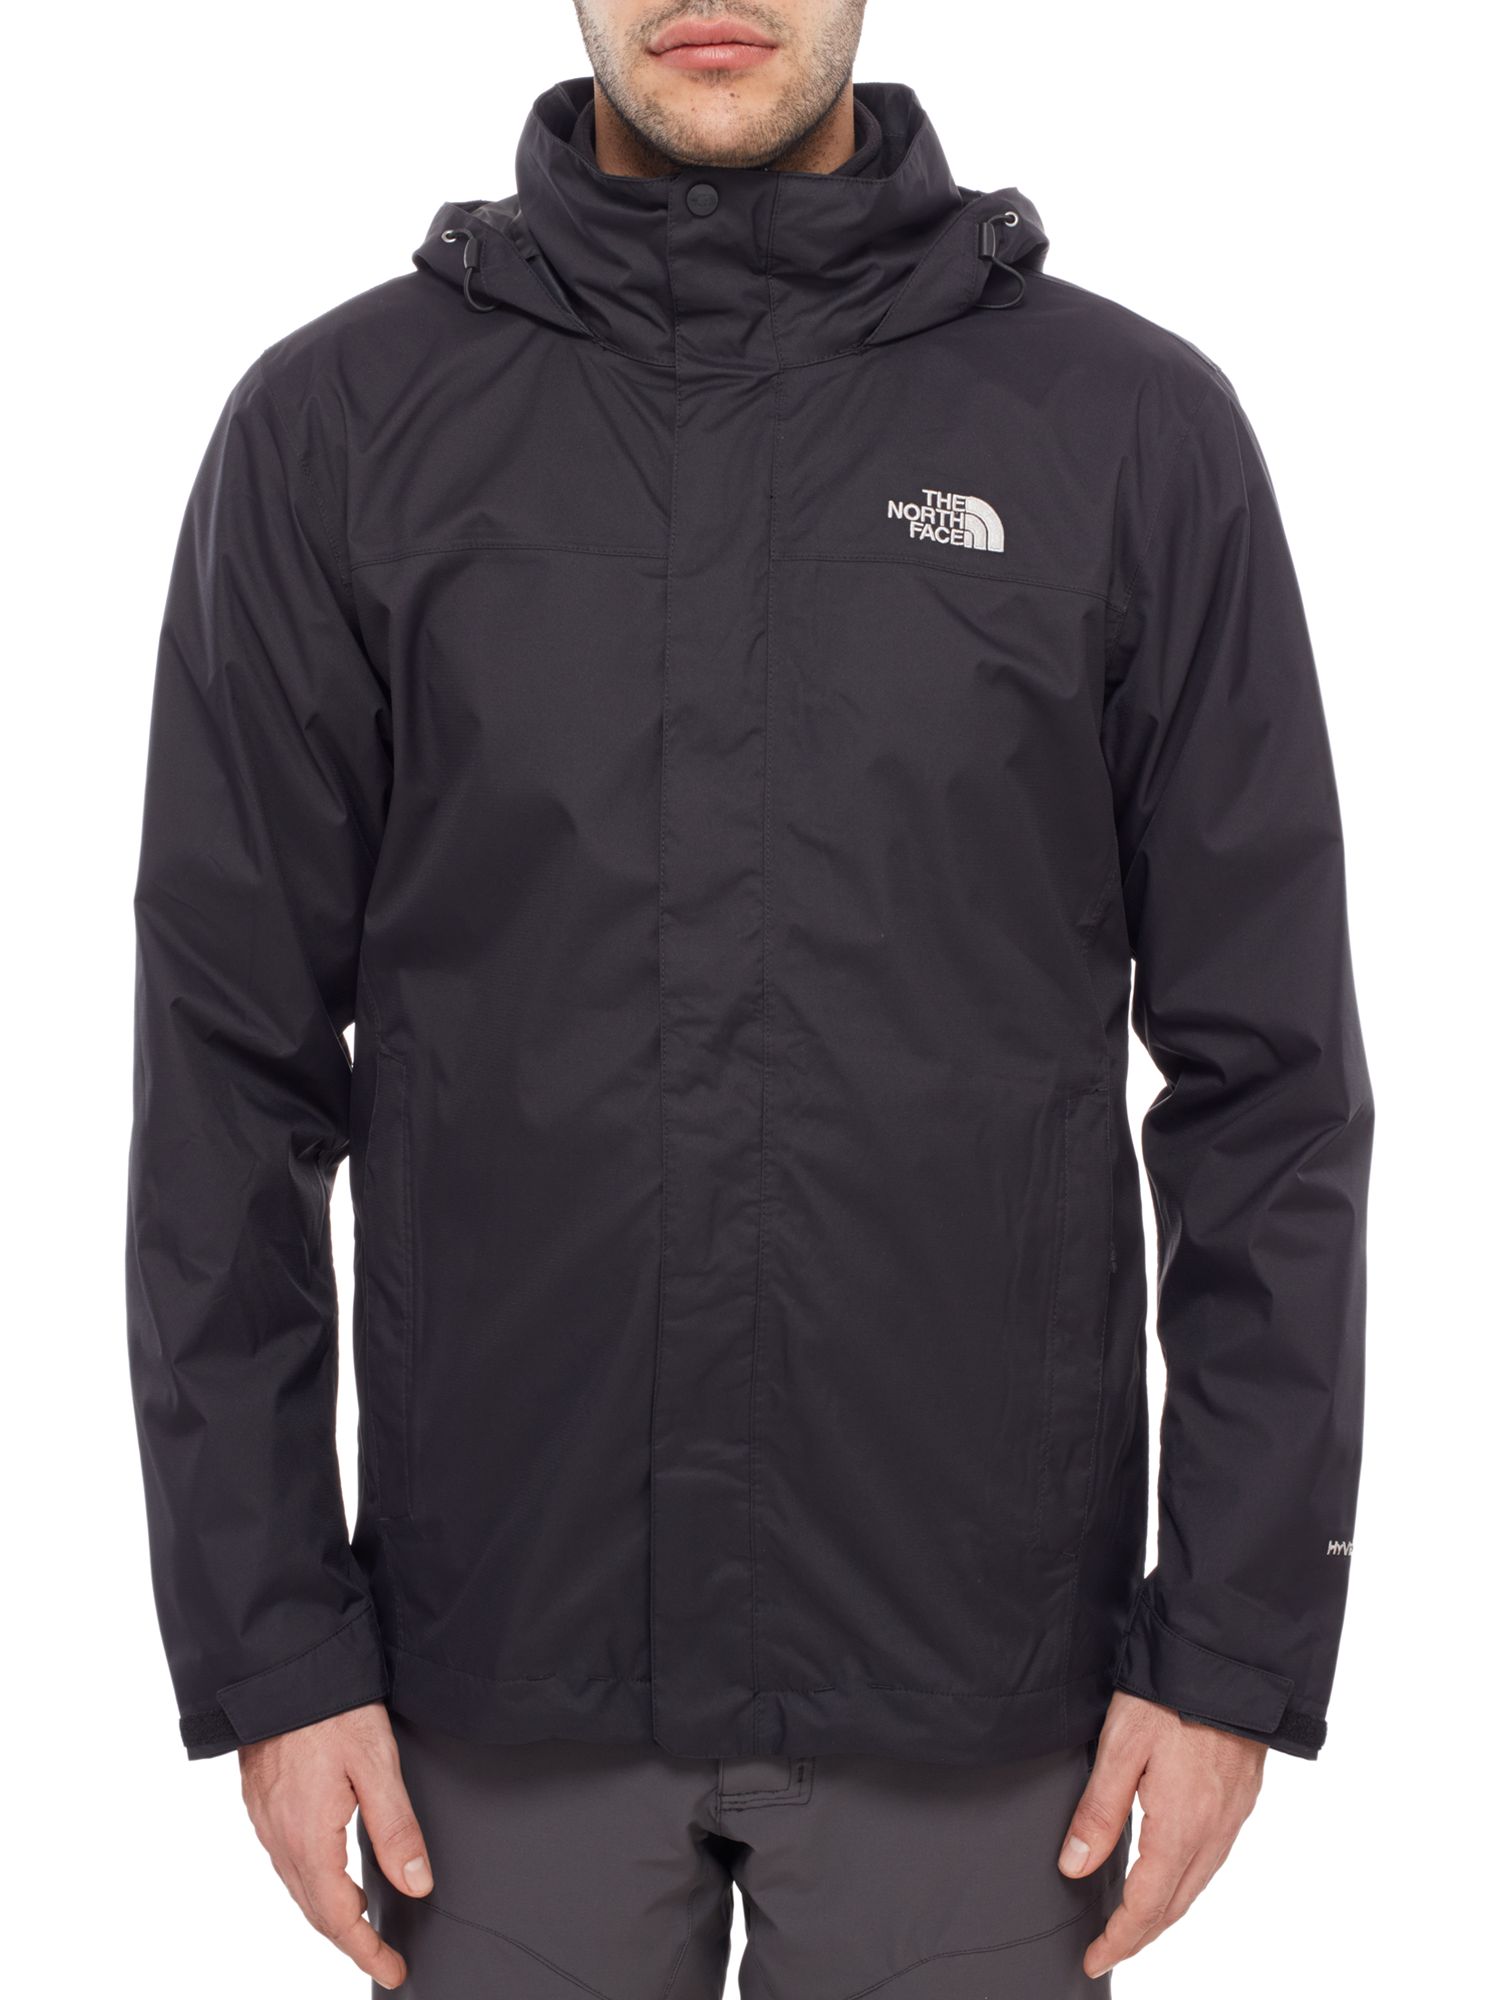 North Face Evolve II Triclimate 3-in-1 Waterproof Jacket, Black at John Lewis & Partners